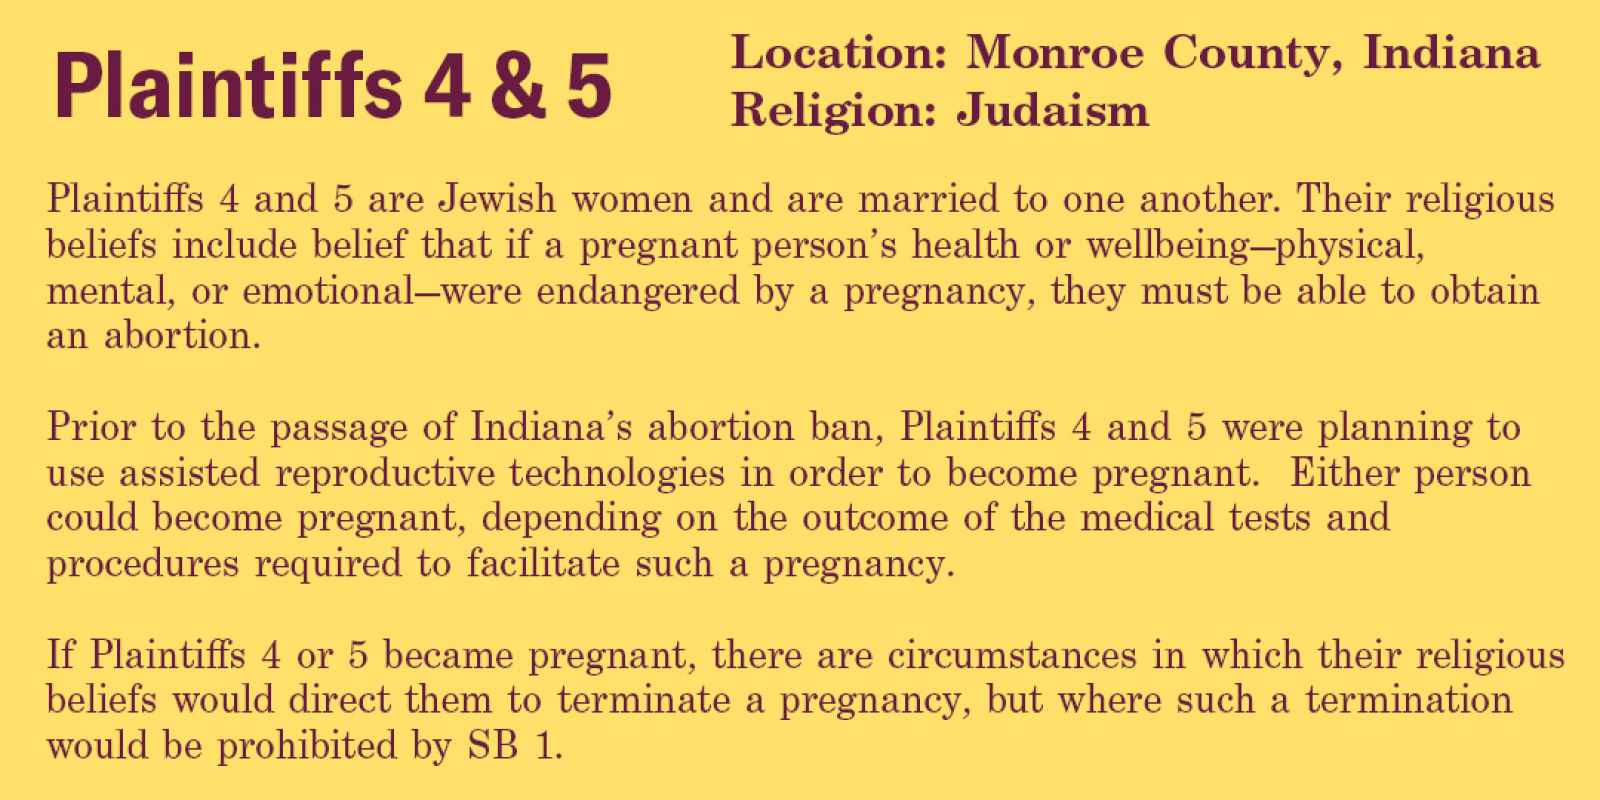 Plaintiffs 4 and 5 are Jewish women and are married to one another. Their religious beliefs include belief that if a pregnant person’s health or wellbeing—physical, mental, or emotional—were endangered by a pregnancy, they must be able to obtain an aborti